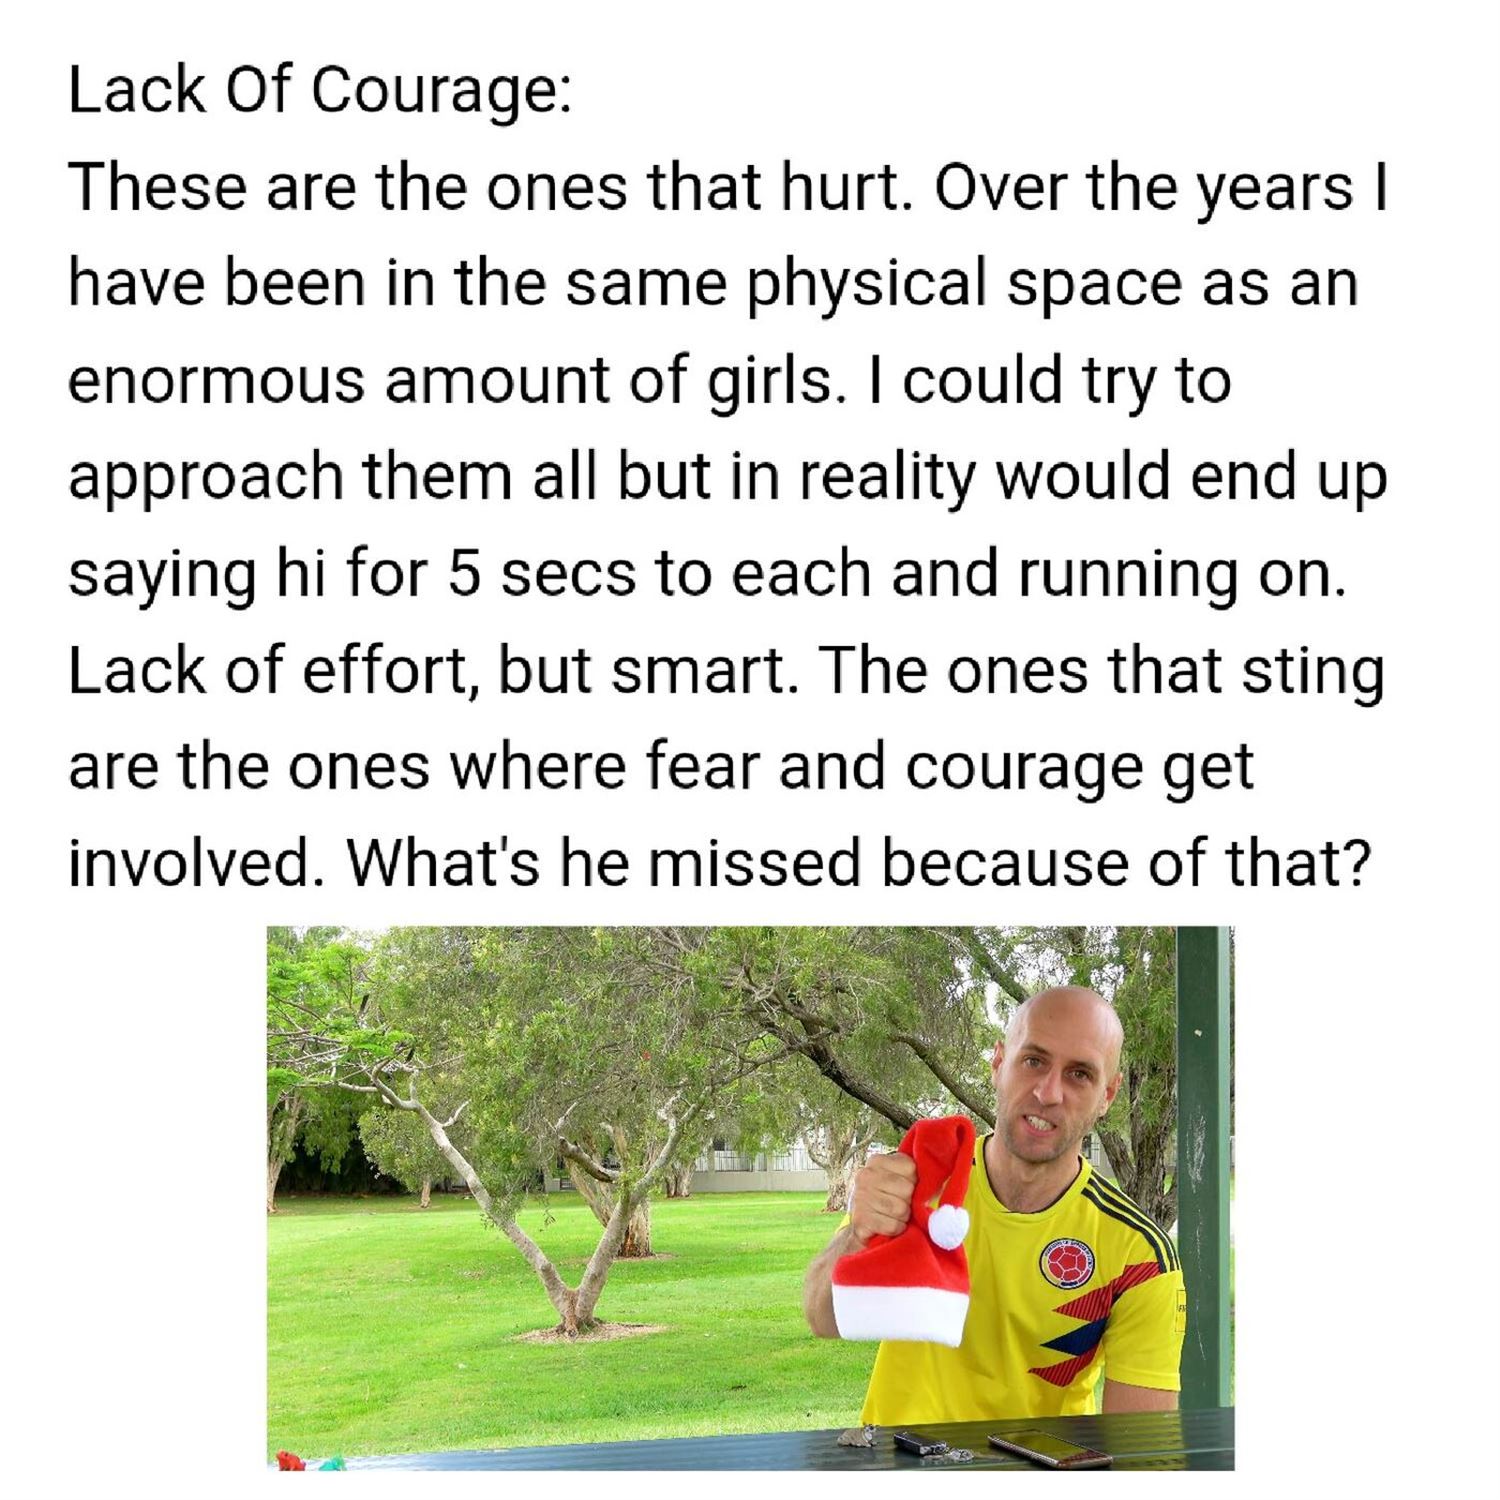 Lack of courage